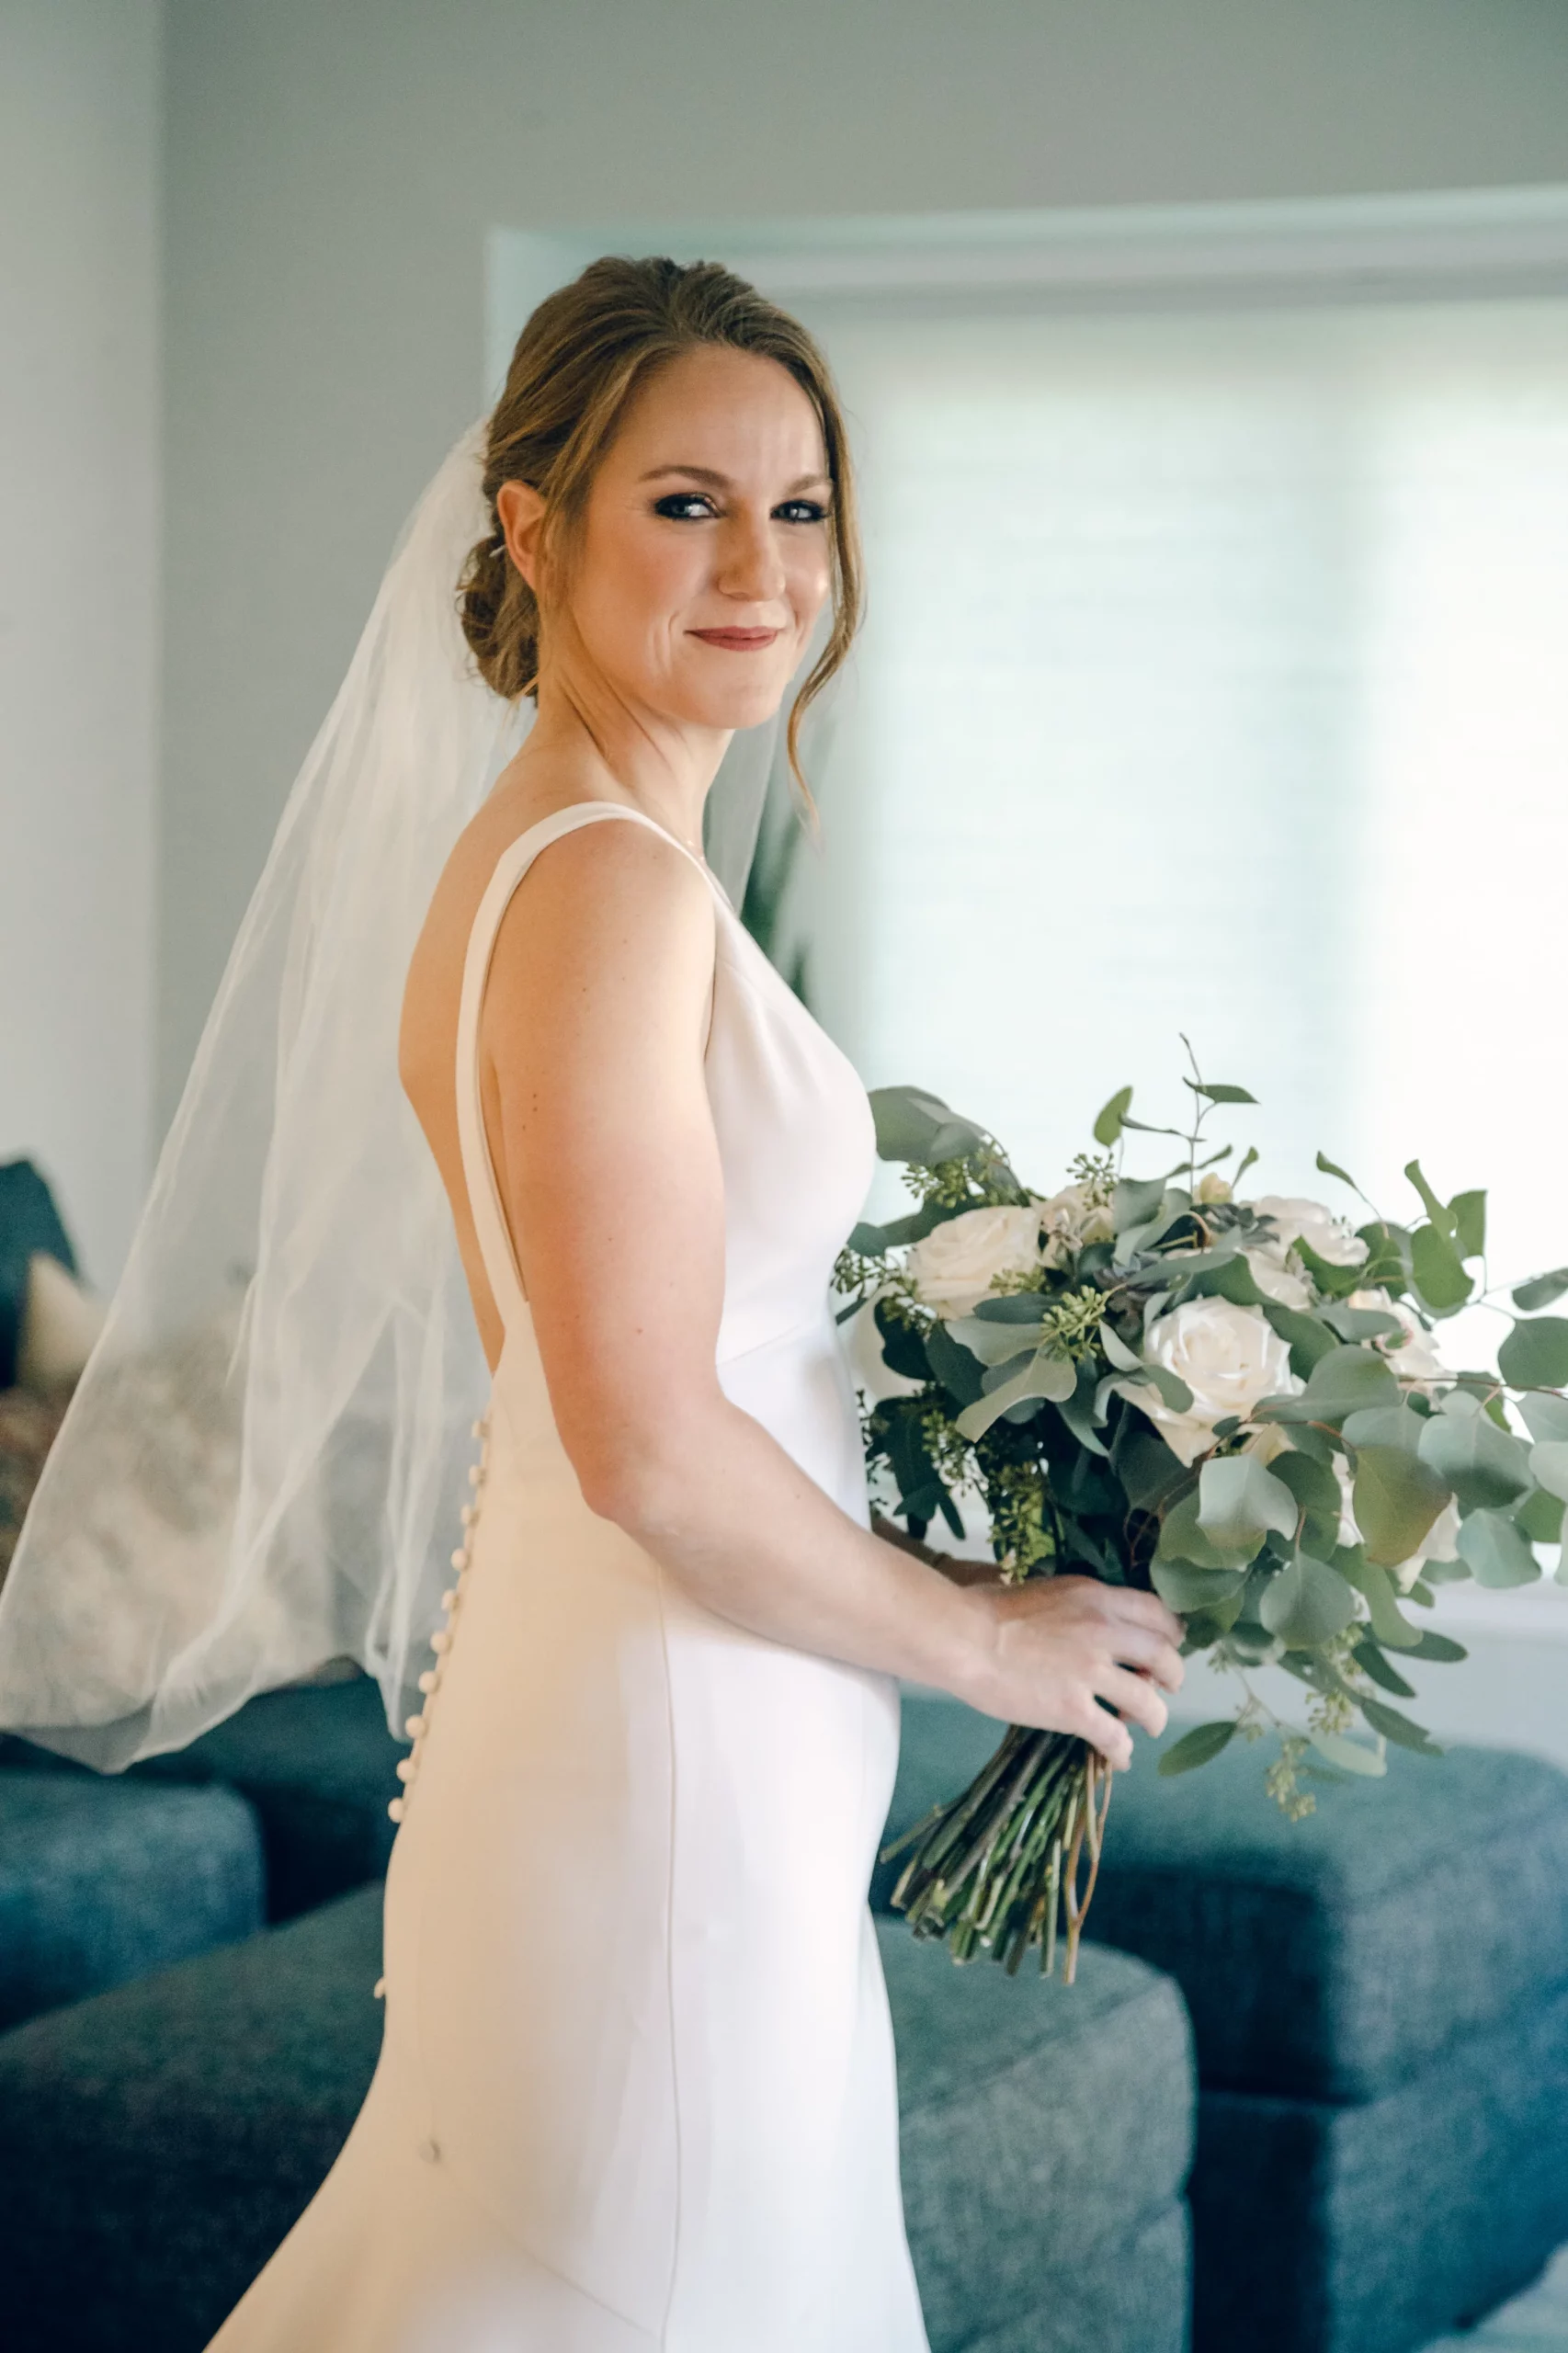 Megan takes a bridal portrait with Rae Allen Photography in her living room hold her white rose and greenery bouquet